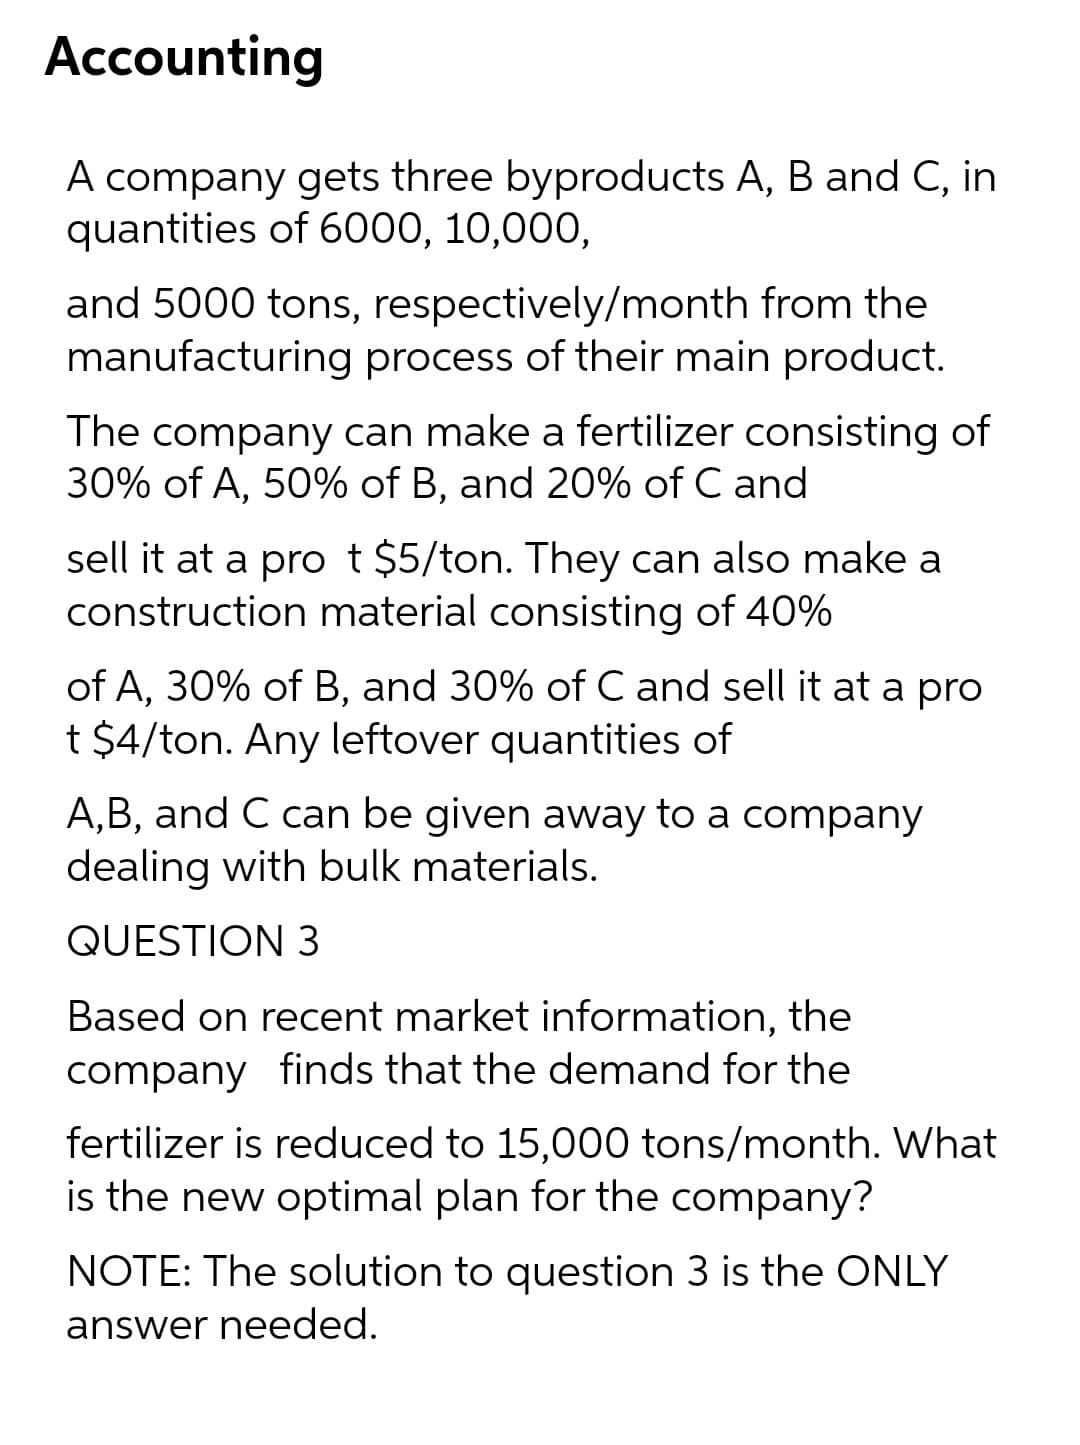 Accounting
A company gets three byproducts A, B and C, in
quantities of 6000, 10,000,
and 5000 tons, respectively/month from the
manufacturing process of their main product.
The company can make a fertilizer consisting of
30% of A, 50% of B, and 20% of C and
sell it at a pro t $5/ton. They can also make a
construction material consisting of 40%
of A, 30% of B, and 30% of C and sell it at a pro
t $4/ton. Any leftover quantities of
A,B, and C can be given away to a company
dealing with bulk materials.
QUESTION 3
Based on recent market information, the
company finds that the demand for the
fertilizer is reduced to 15,000 tons/month. What
is the new optimal plan for the company?
NOTE: The solution to question 3 is the ONLY
answer needed.
